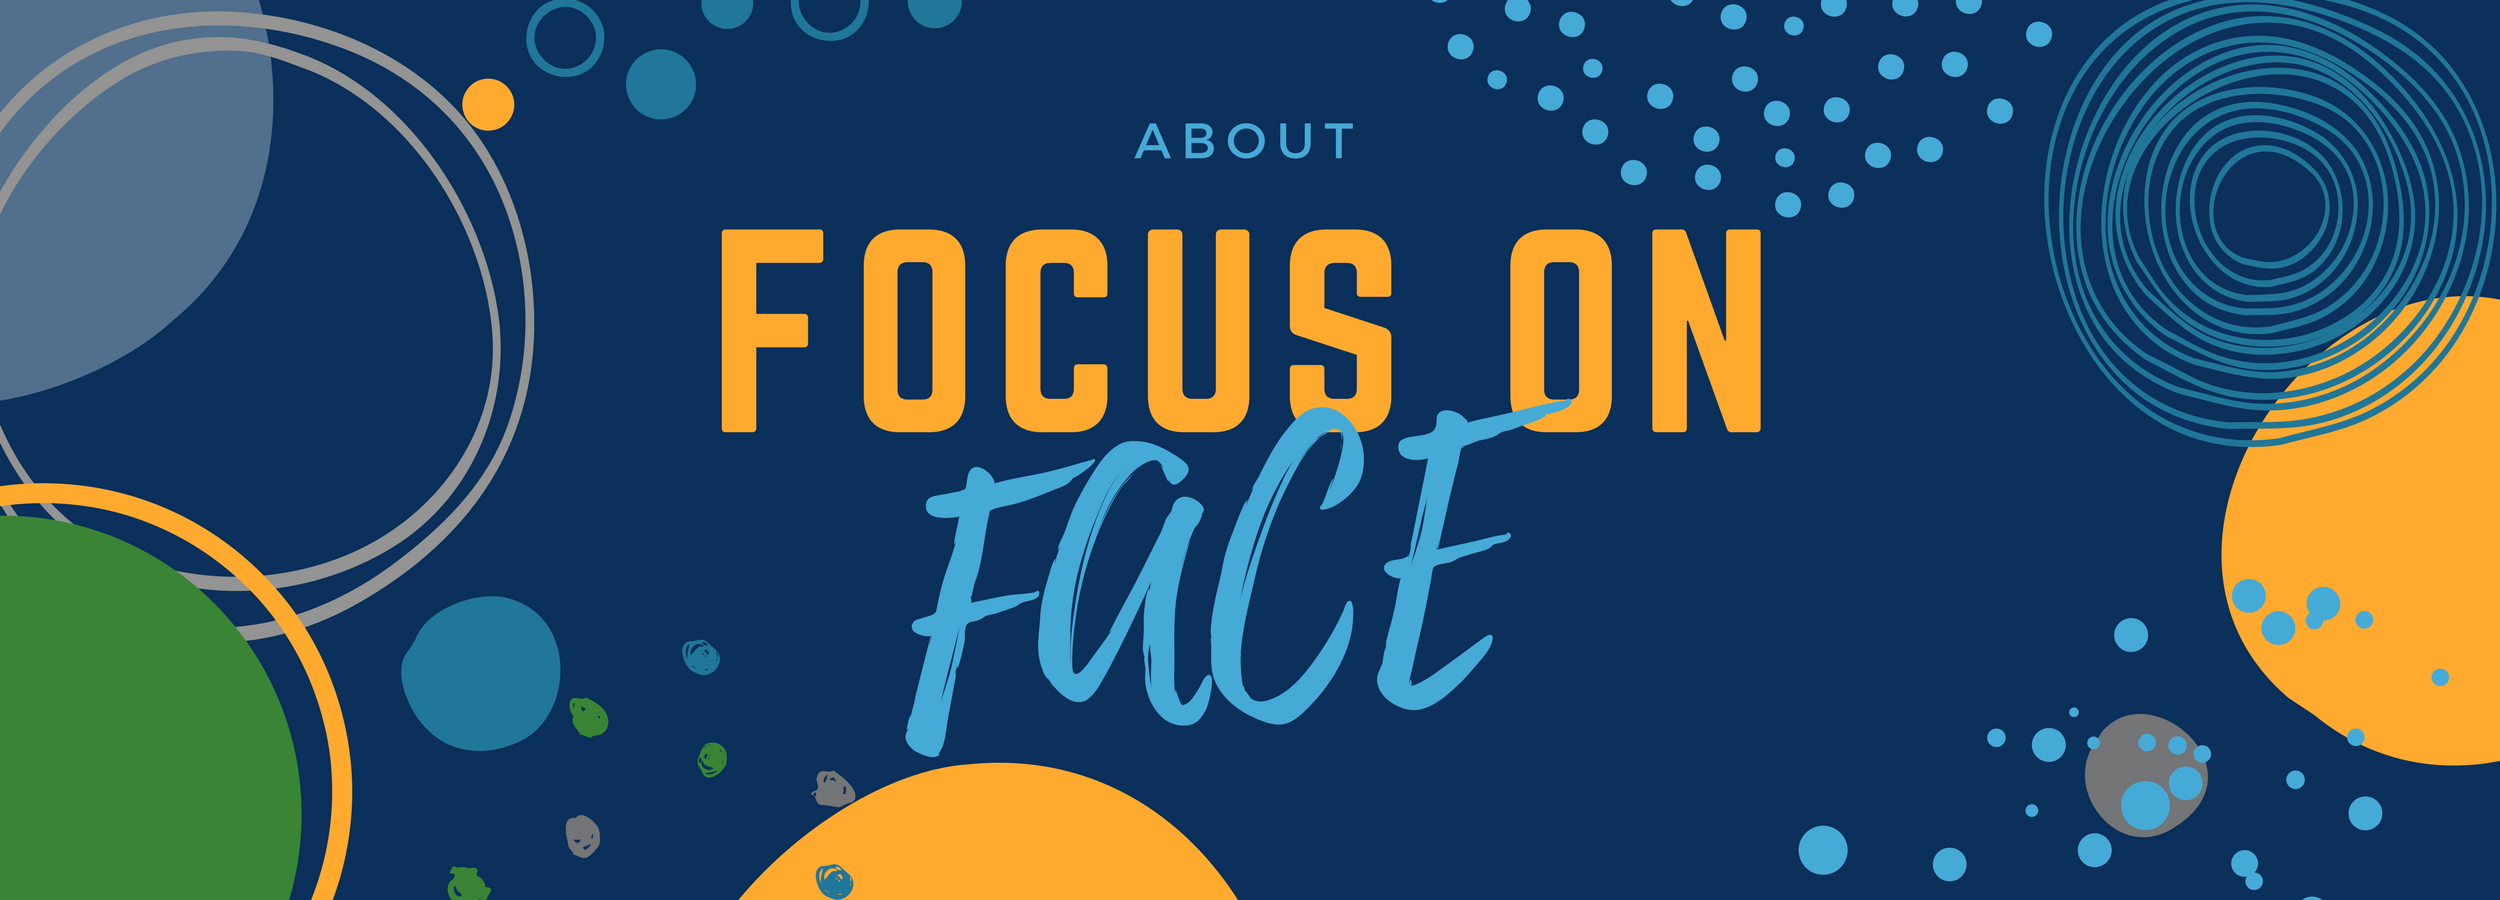 About Focus on FACE logo